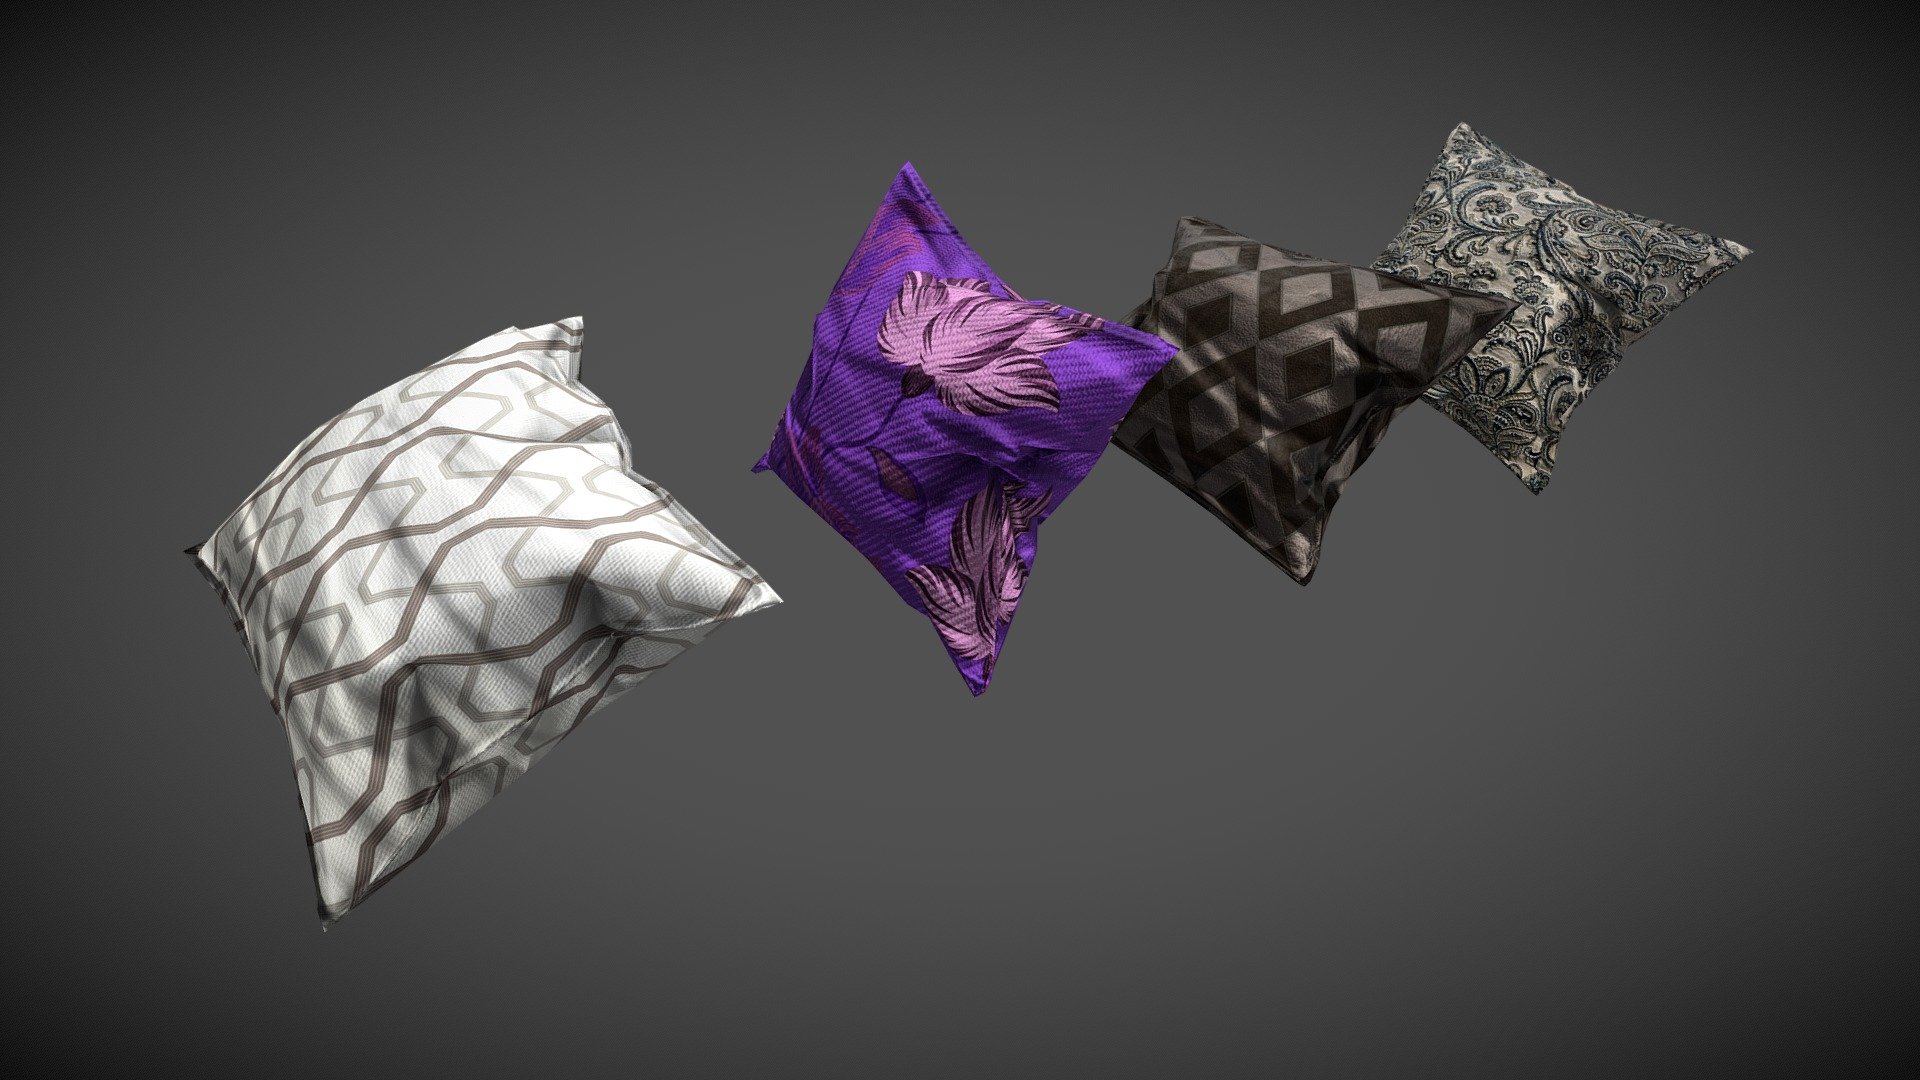 4 Pillow:
This pillows have been modelled in Autodesk 3DS Max.
The pillows textures have been made in Photoshop and Substance Painter.

This models are game or VR ready - Pillows - 3D model by nicola.introini (@NIN23) 3d model